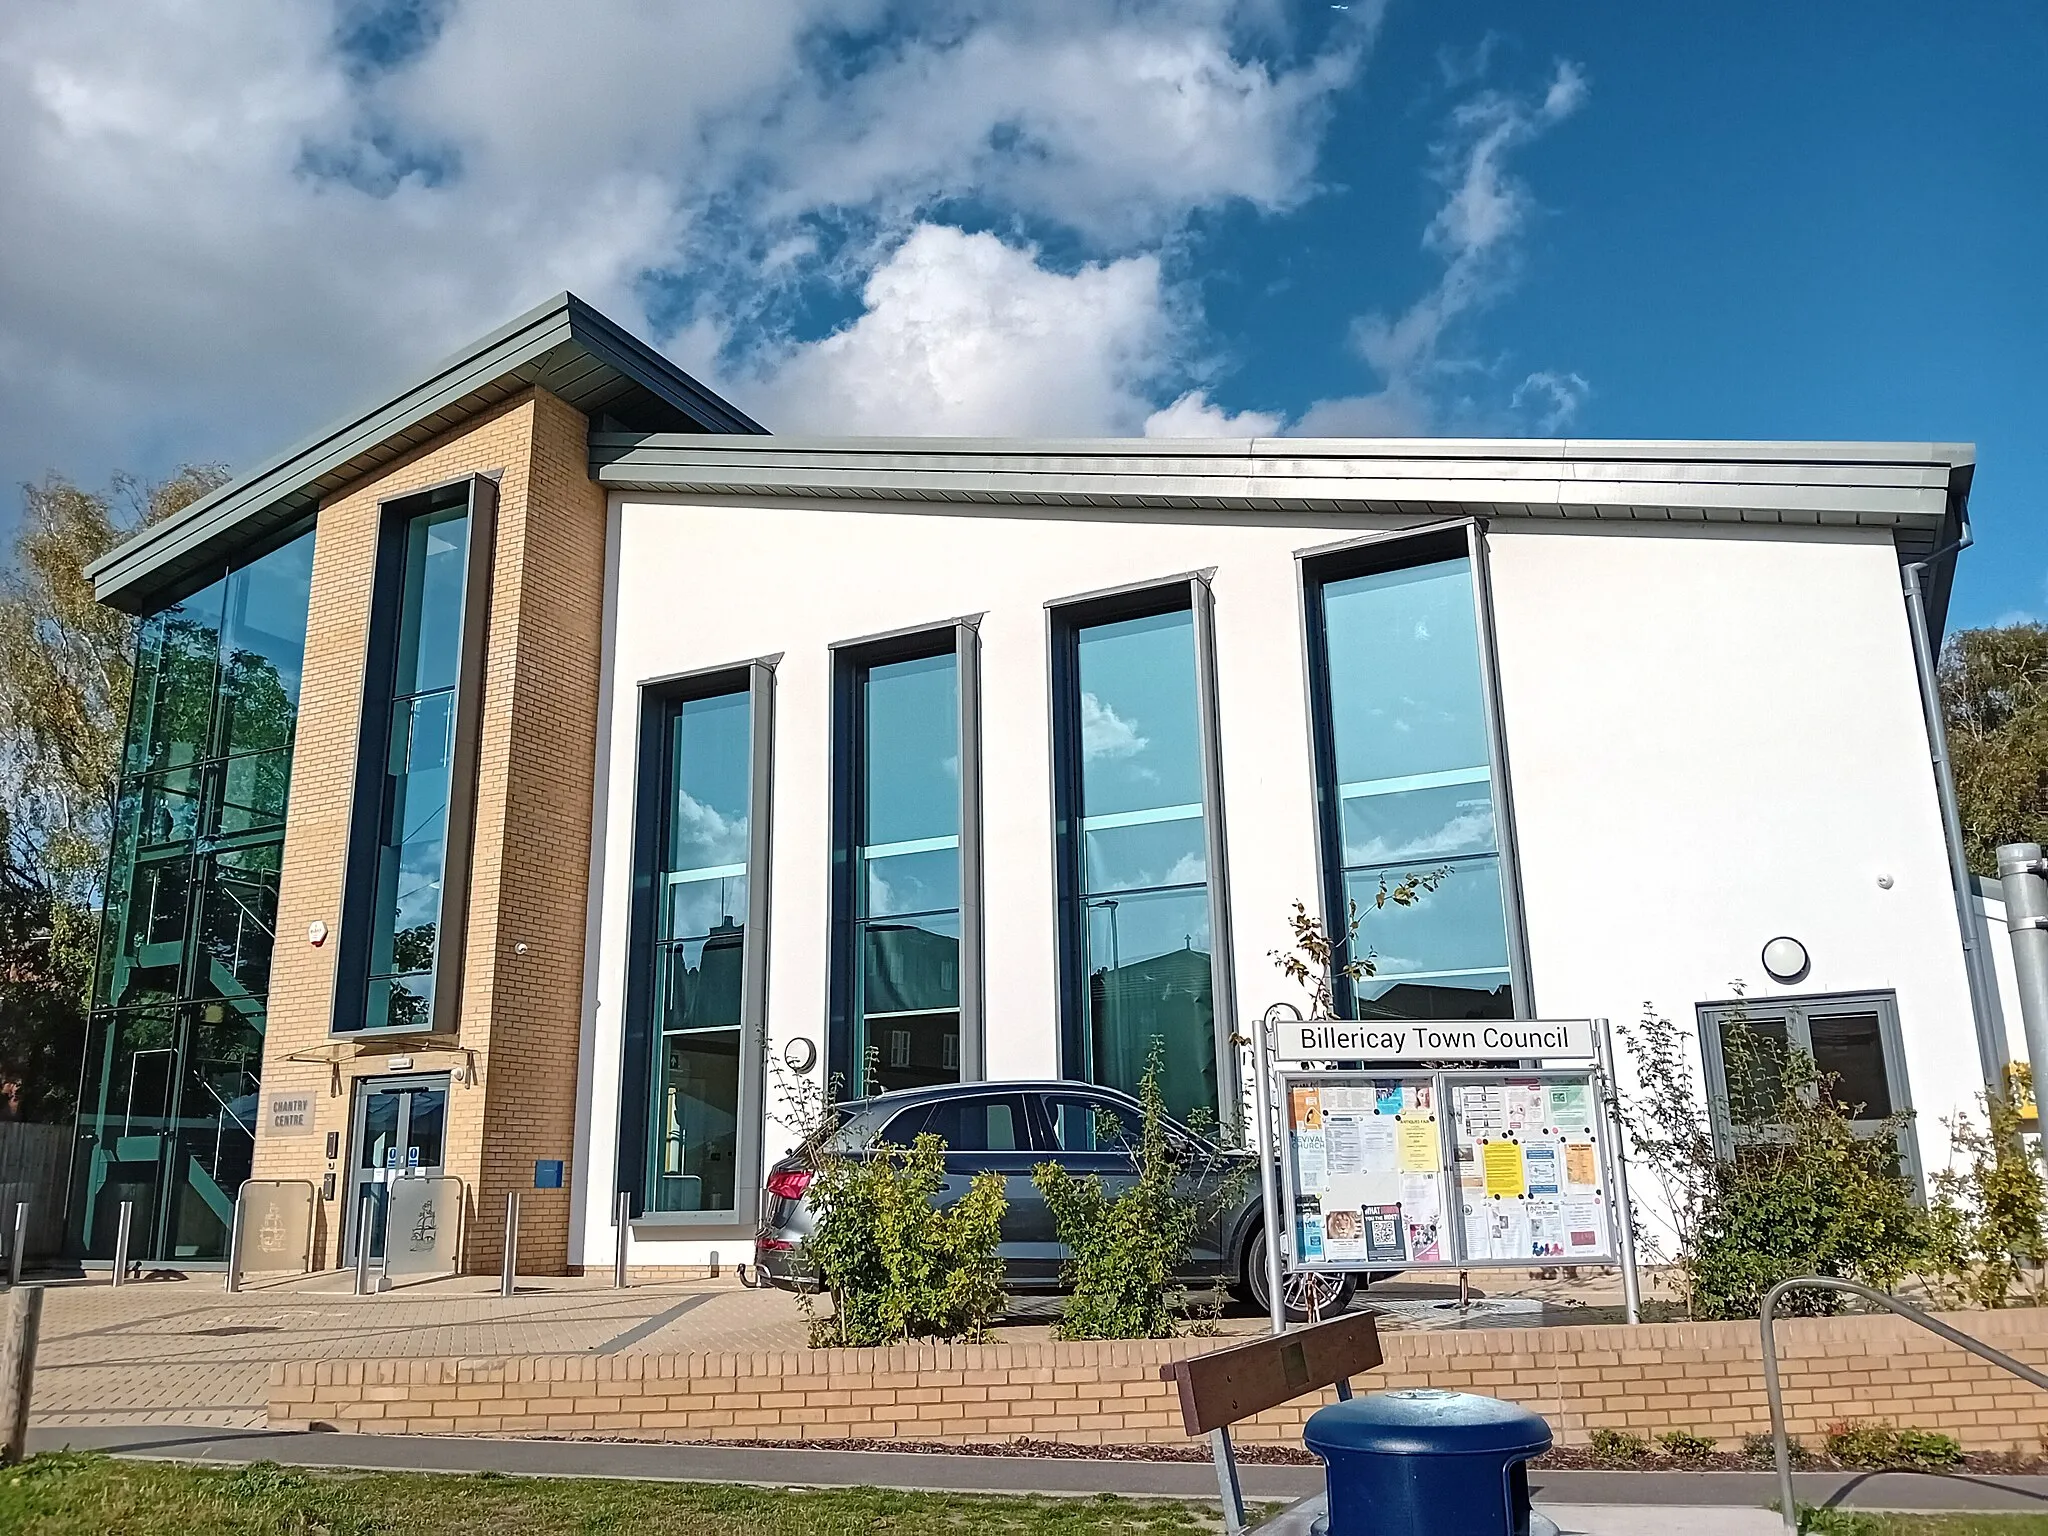 Photo showing: Headquarters of Billericay Town Council, built 2020